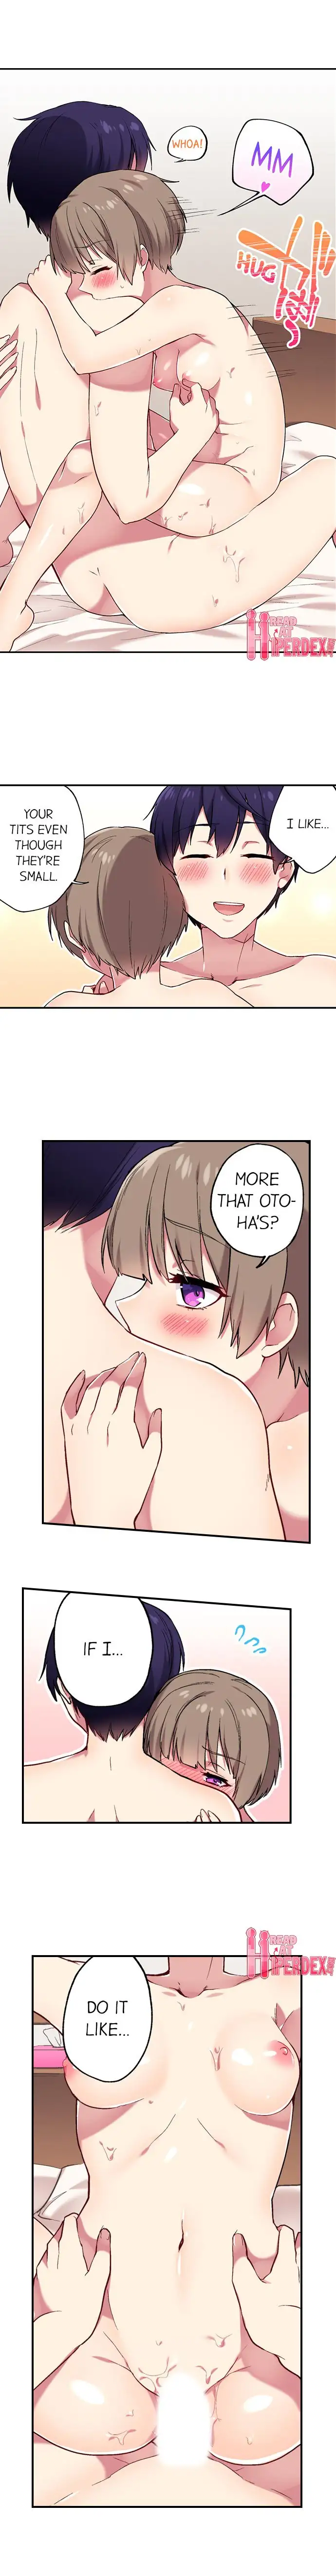 Committee Chairman, Didn’t You Just Masturbate In the Bathroom? I Can See the Number of Times People Orgasm - Chapter 54 Page 6